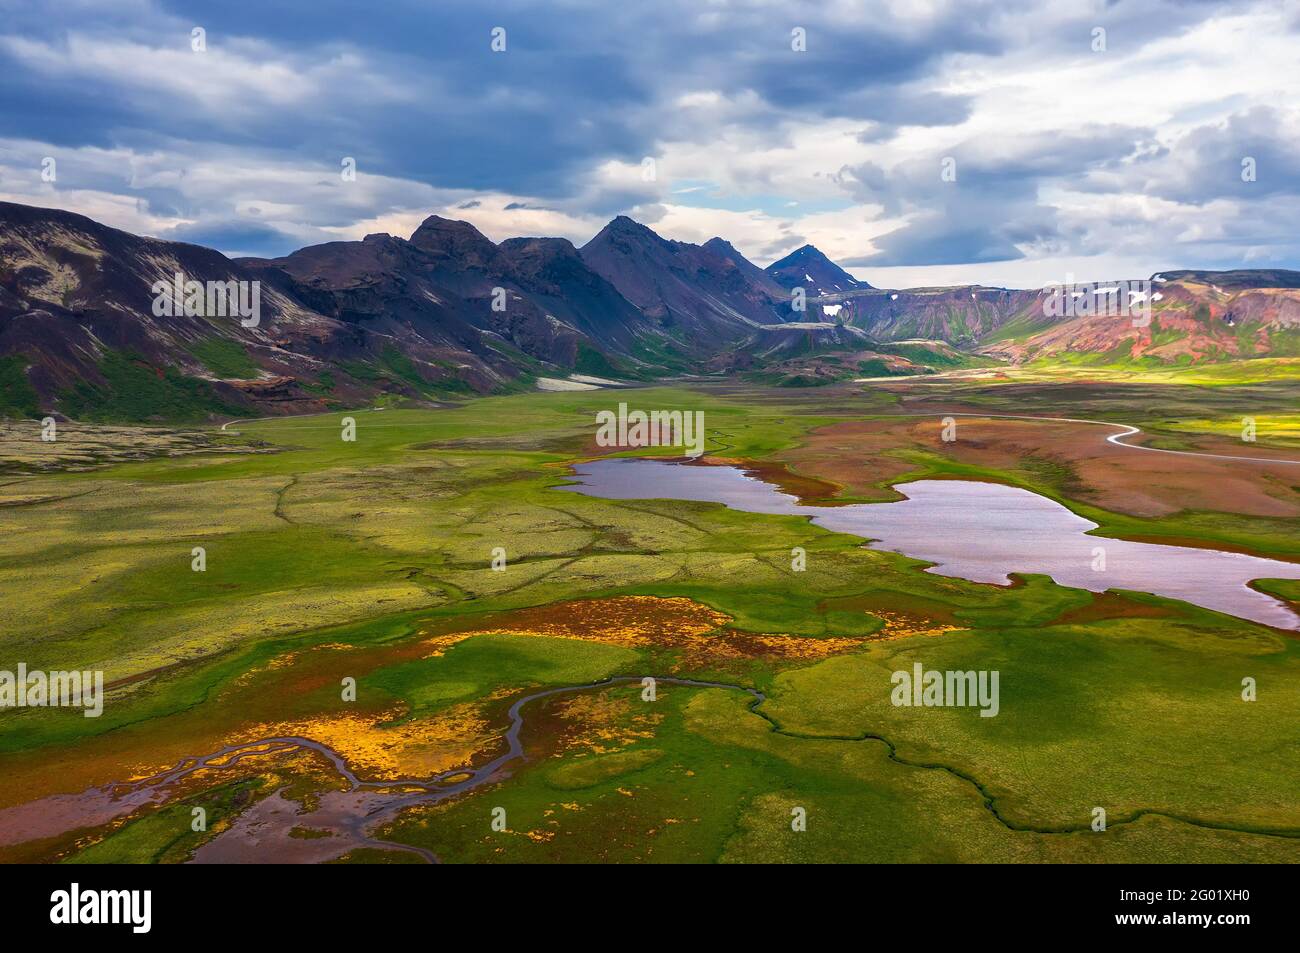 Aerial view of lakes and mountains in Thingvellir National Park, Iceland Stock Photo